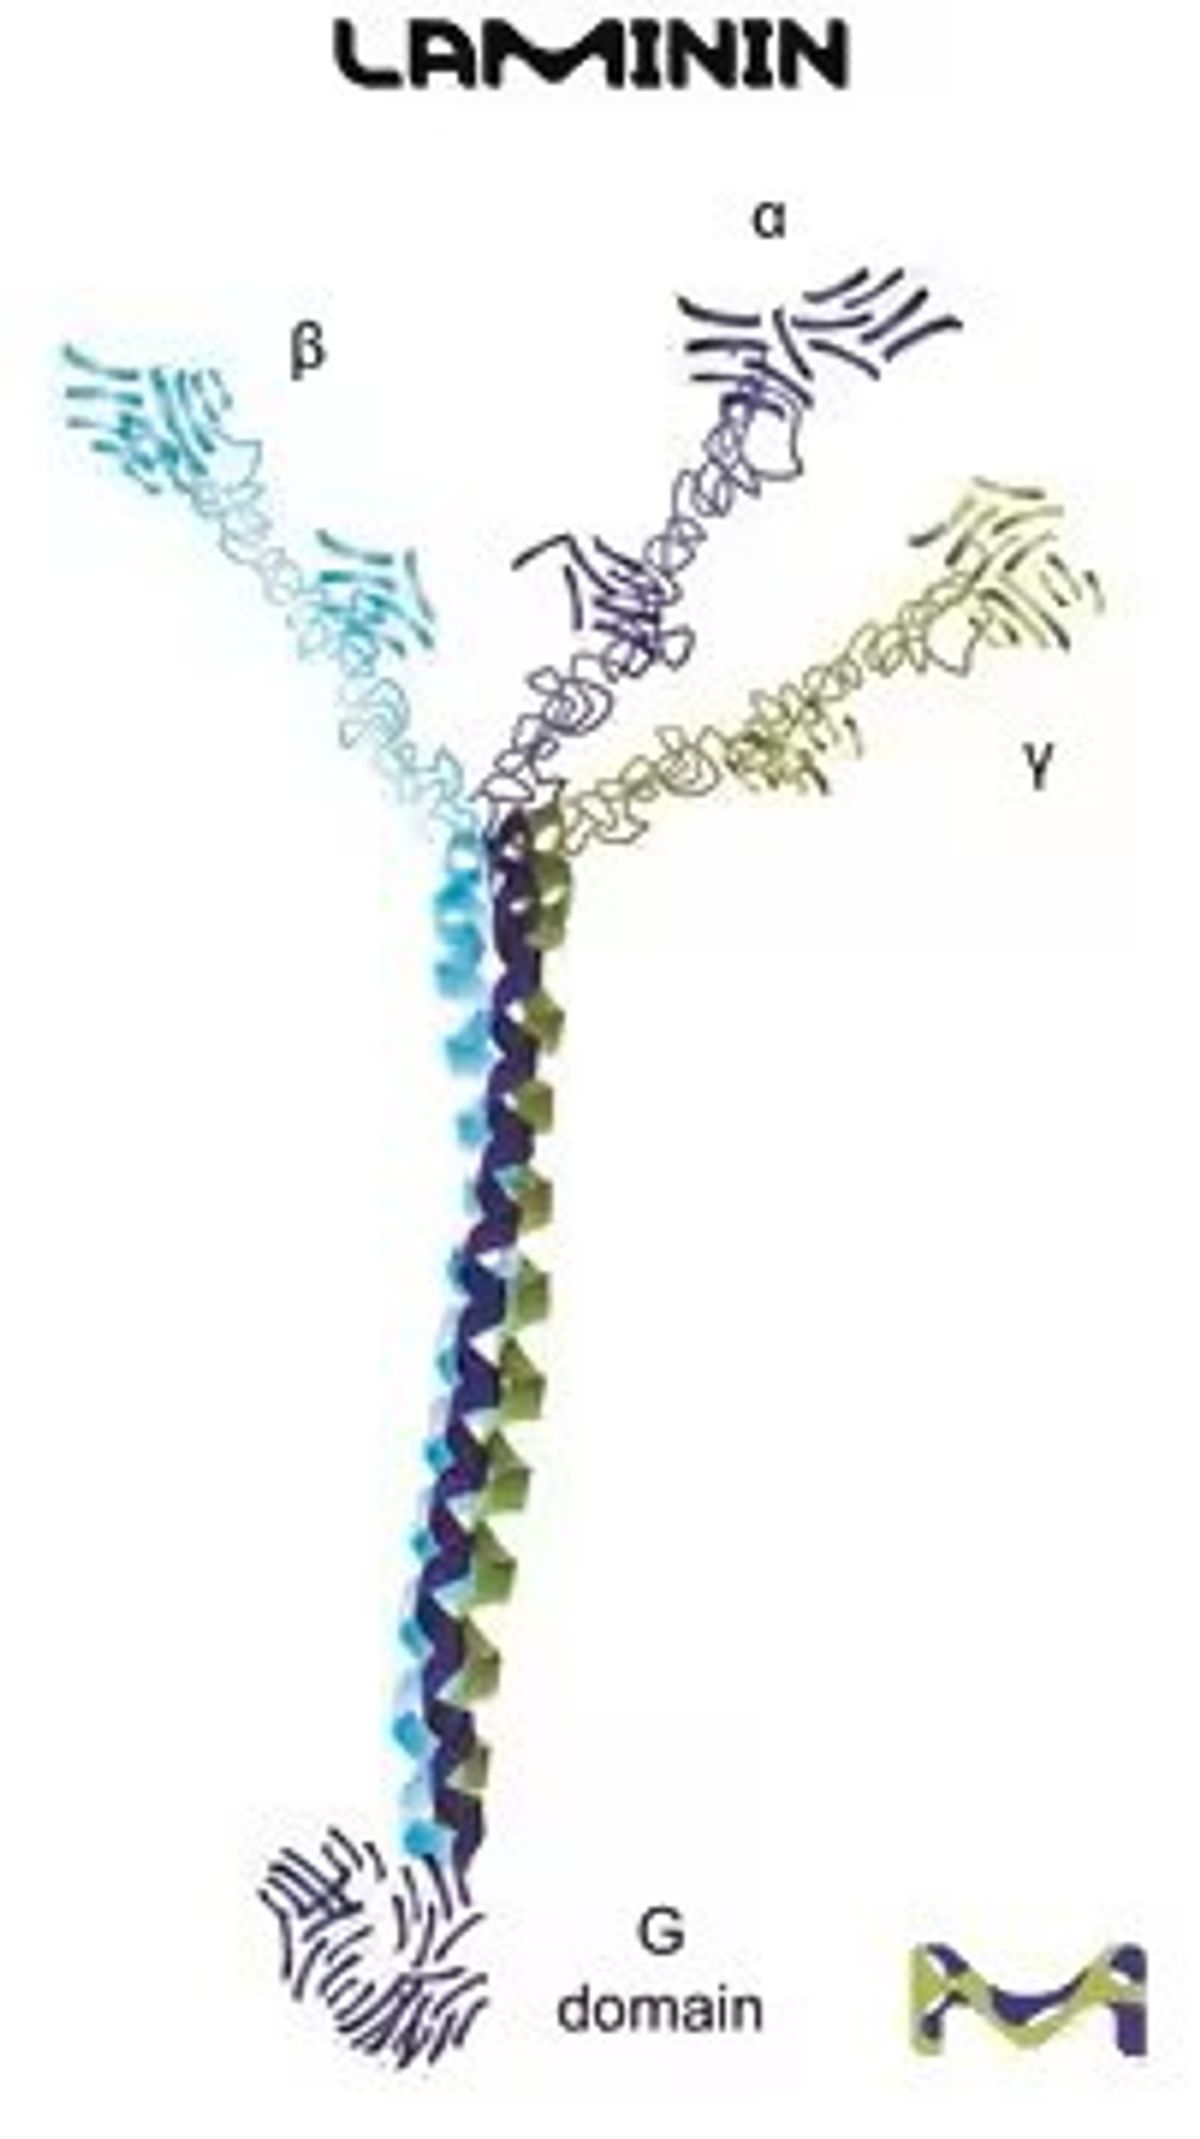 Structural rendering of the laminin protein in blue, purple, and green.